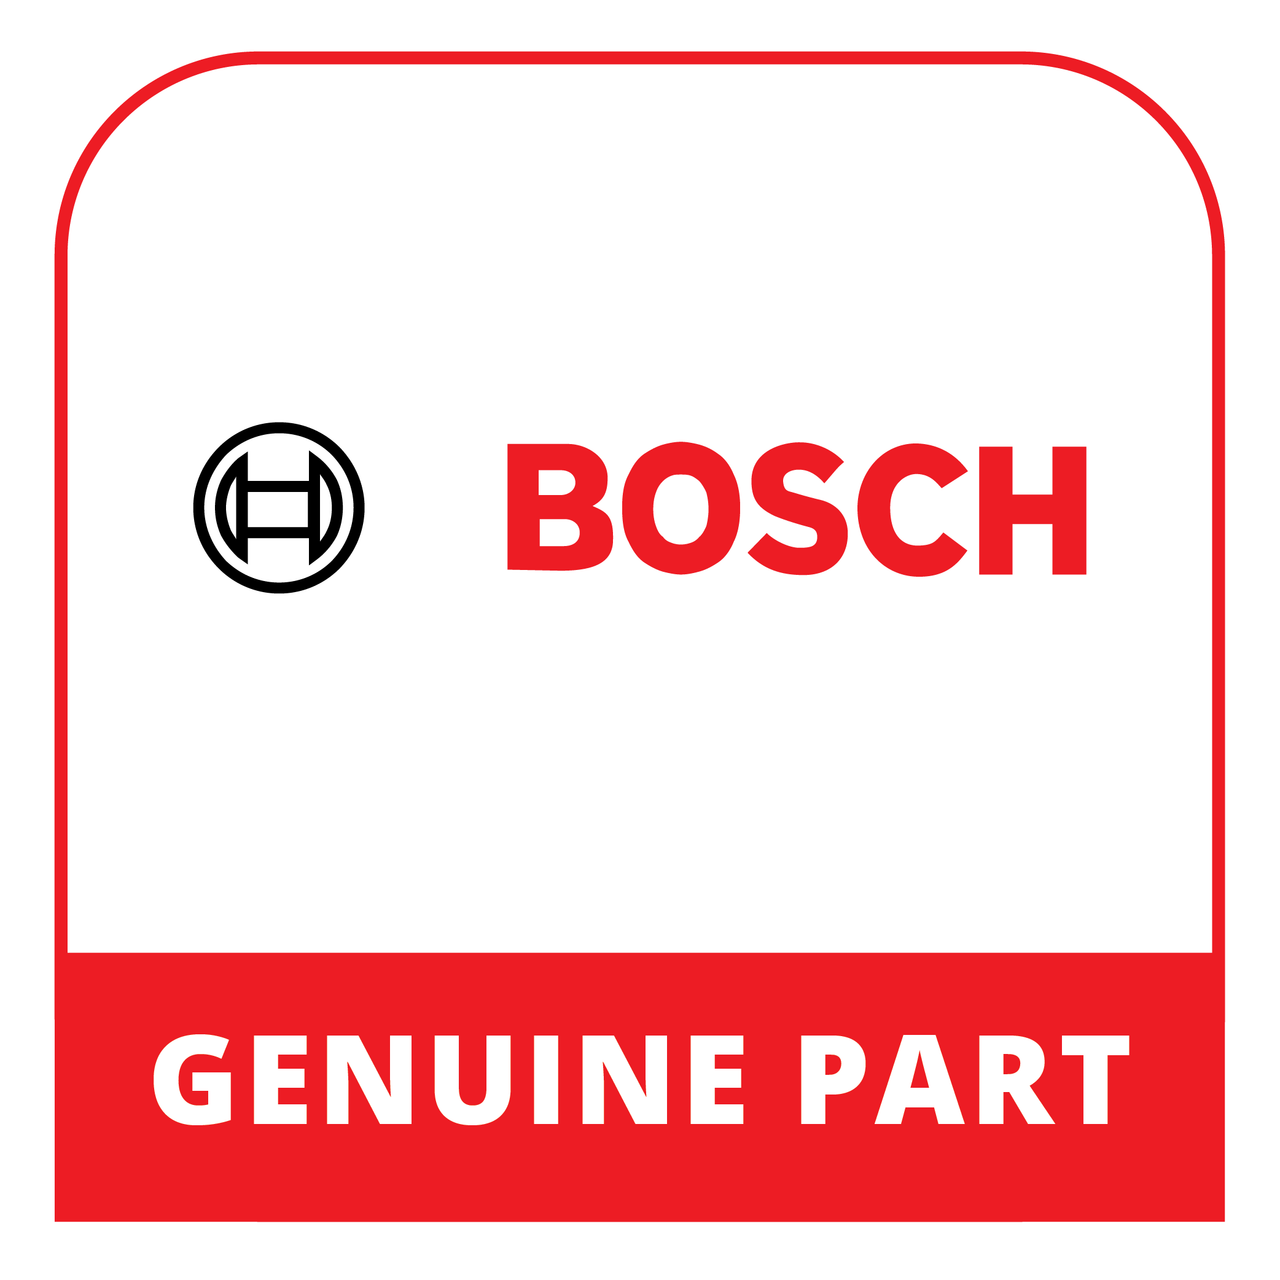 Bosch (Thermador) 11030723 - Strip - Genuine Bosch (Thermador) Part